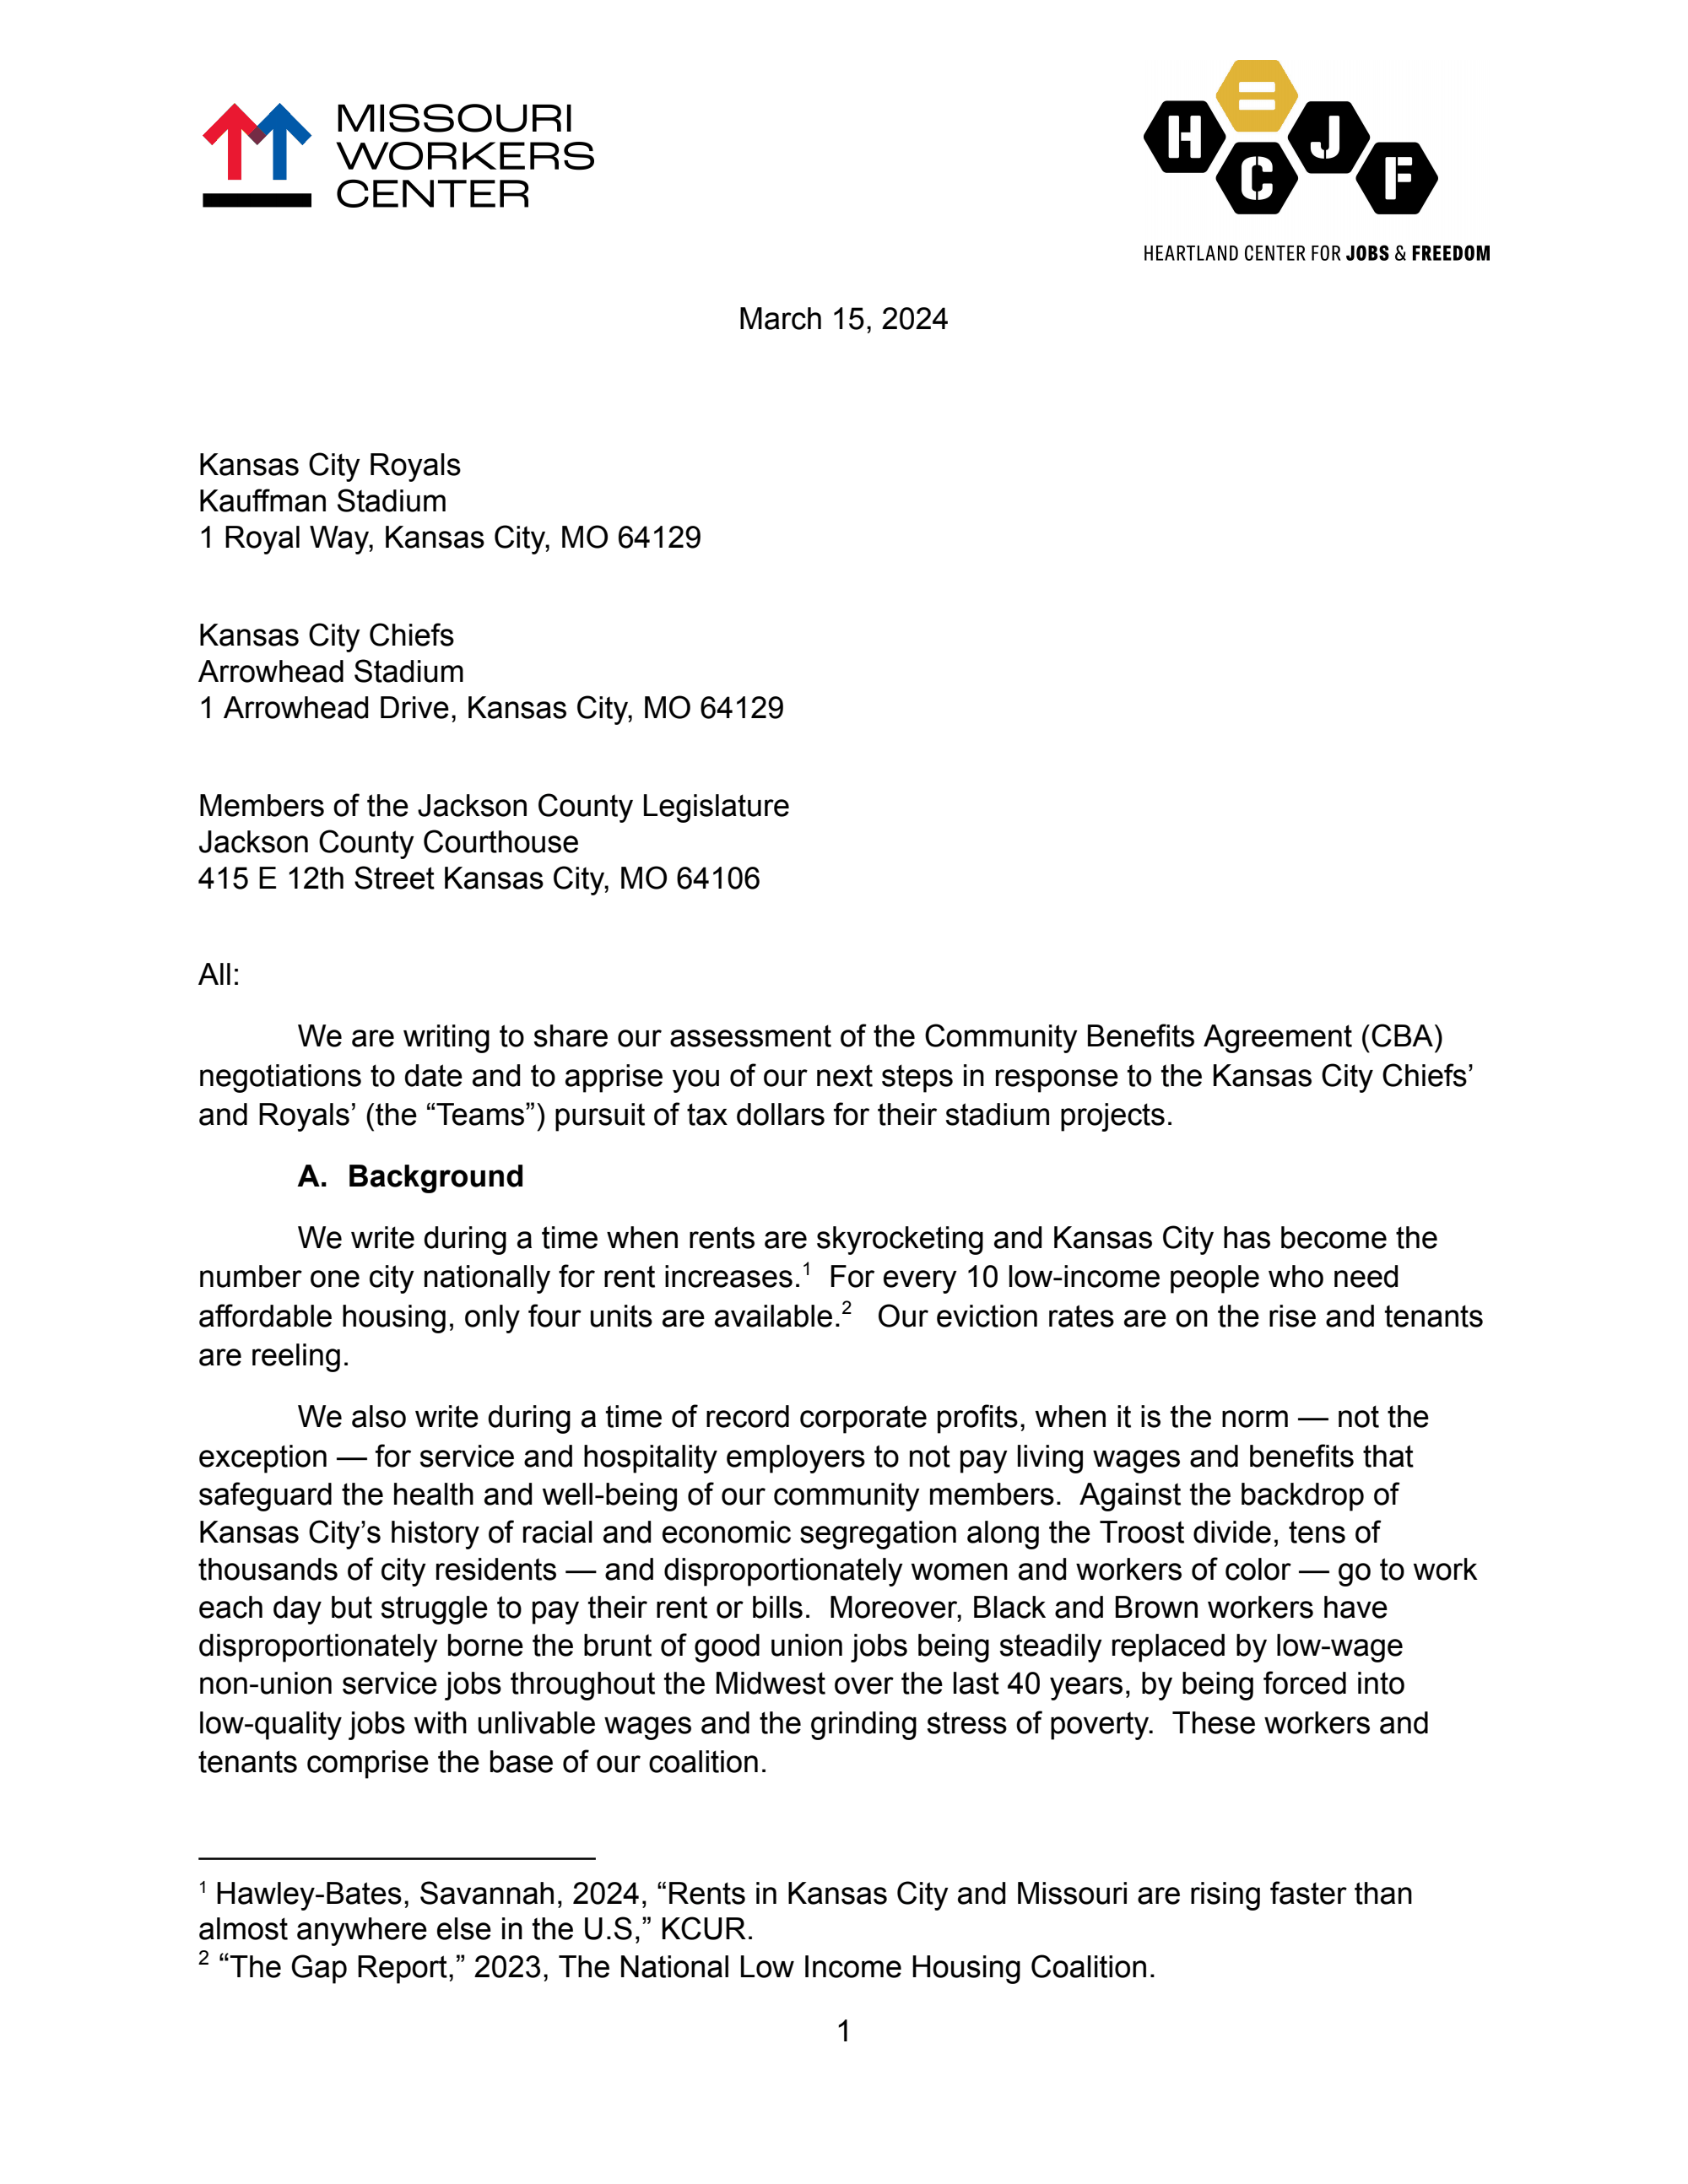 Page 1 of Good Jobs Coalition letter to Royals